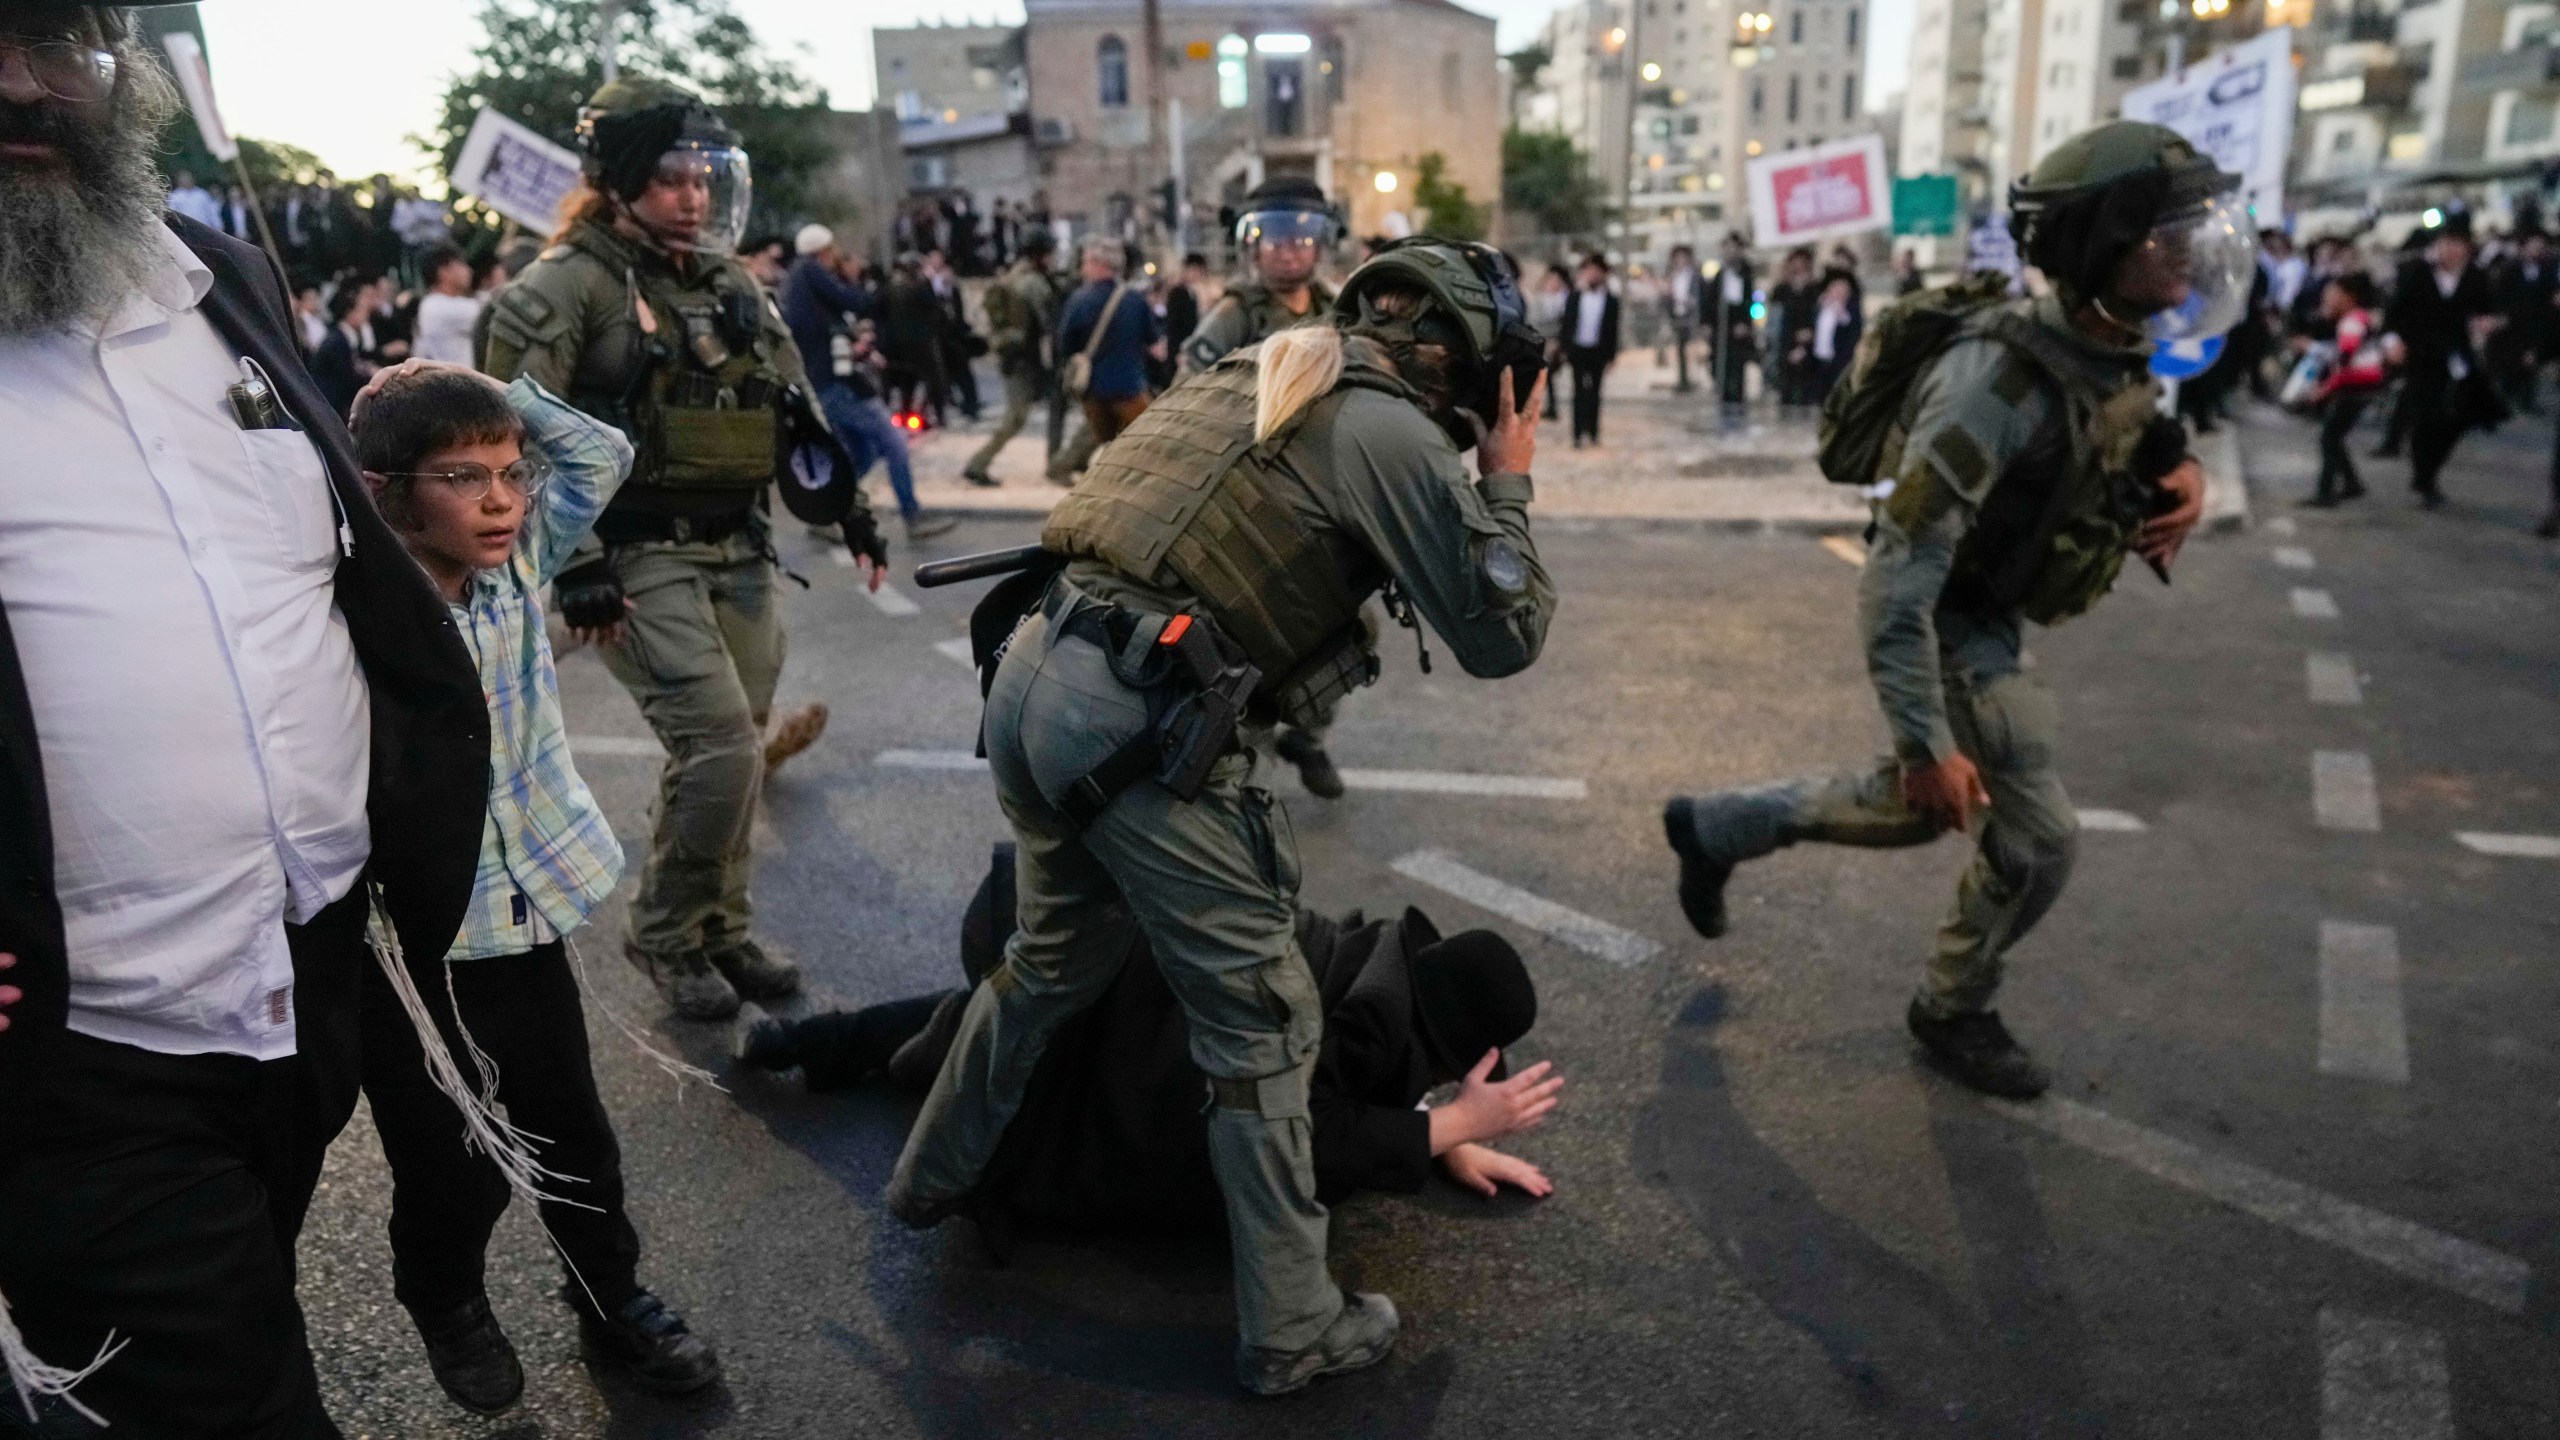 Ultra-Orthodox Jewish men clash with police during a rally against army recruitment in Jerusalem on Sunday, June 30, 2024. Israel's Supreme Court last week ordered the government to begin drafting ultra-Orthodox men into the army, a landmark ruling seeking to end a system that has allowed them to avoid enlistment into compulsory military service. (AP Photo/Ohad Zwigenberg)